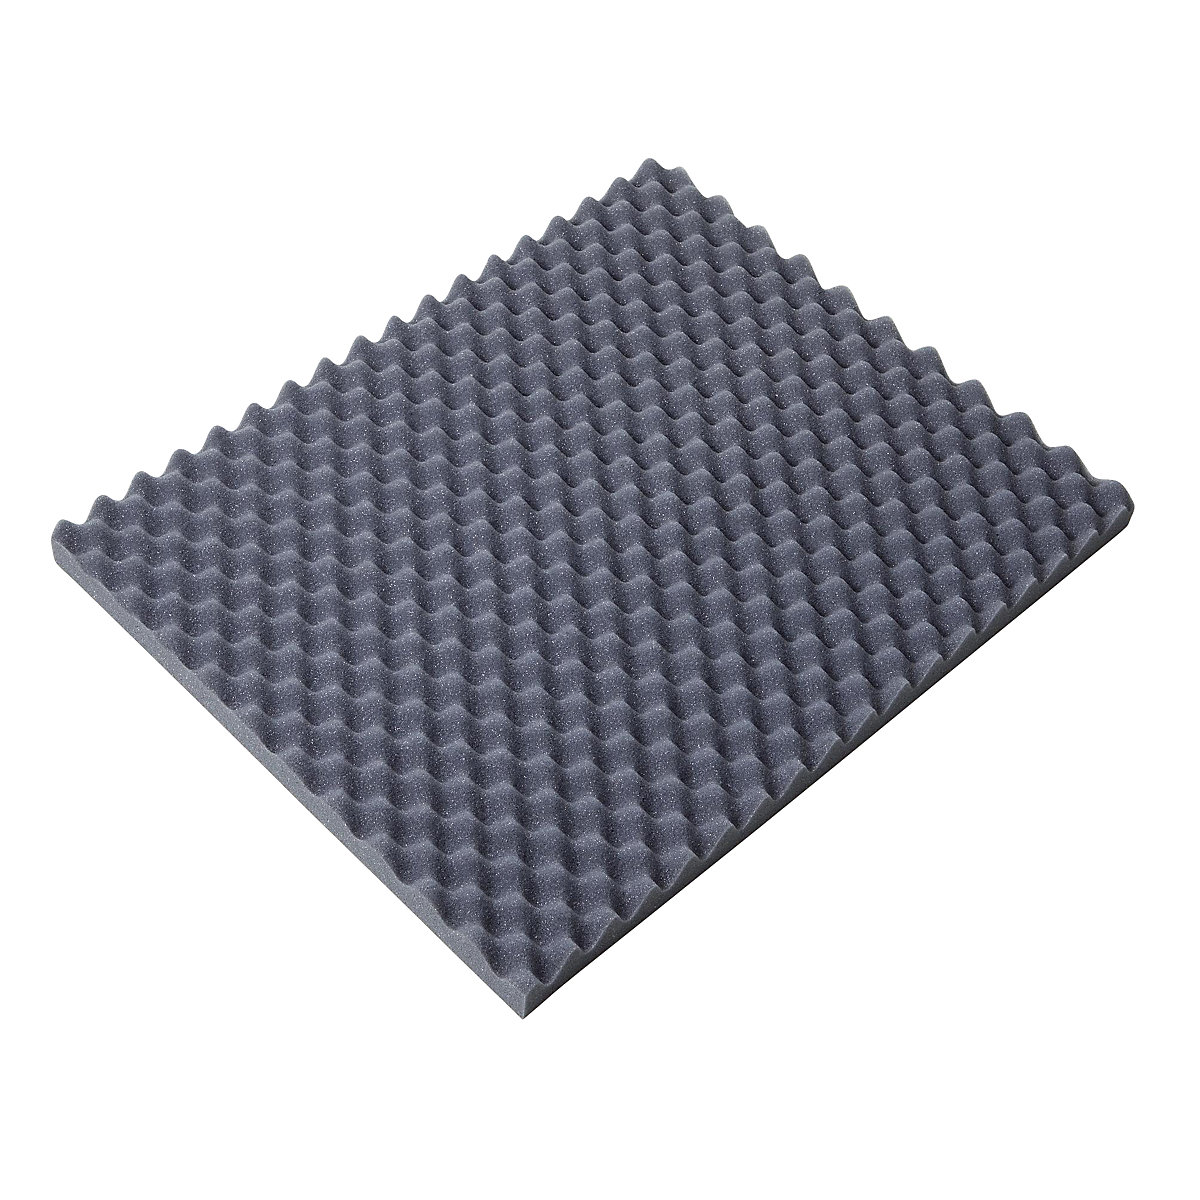 Egg crate foam sheet, 40 mm thick, LxW 600 x 400 mm, pack of 26, 3+ packs-4